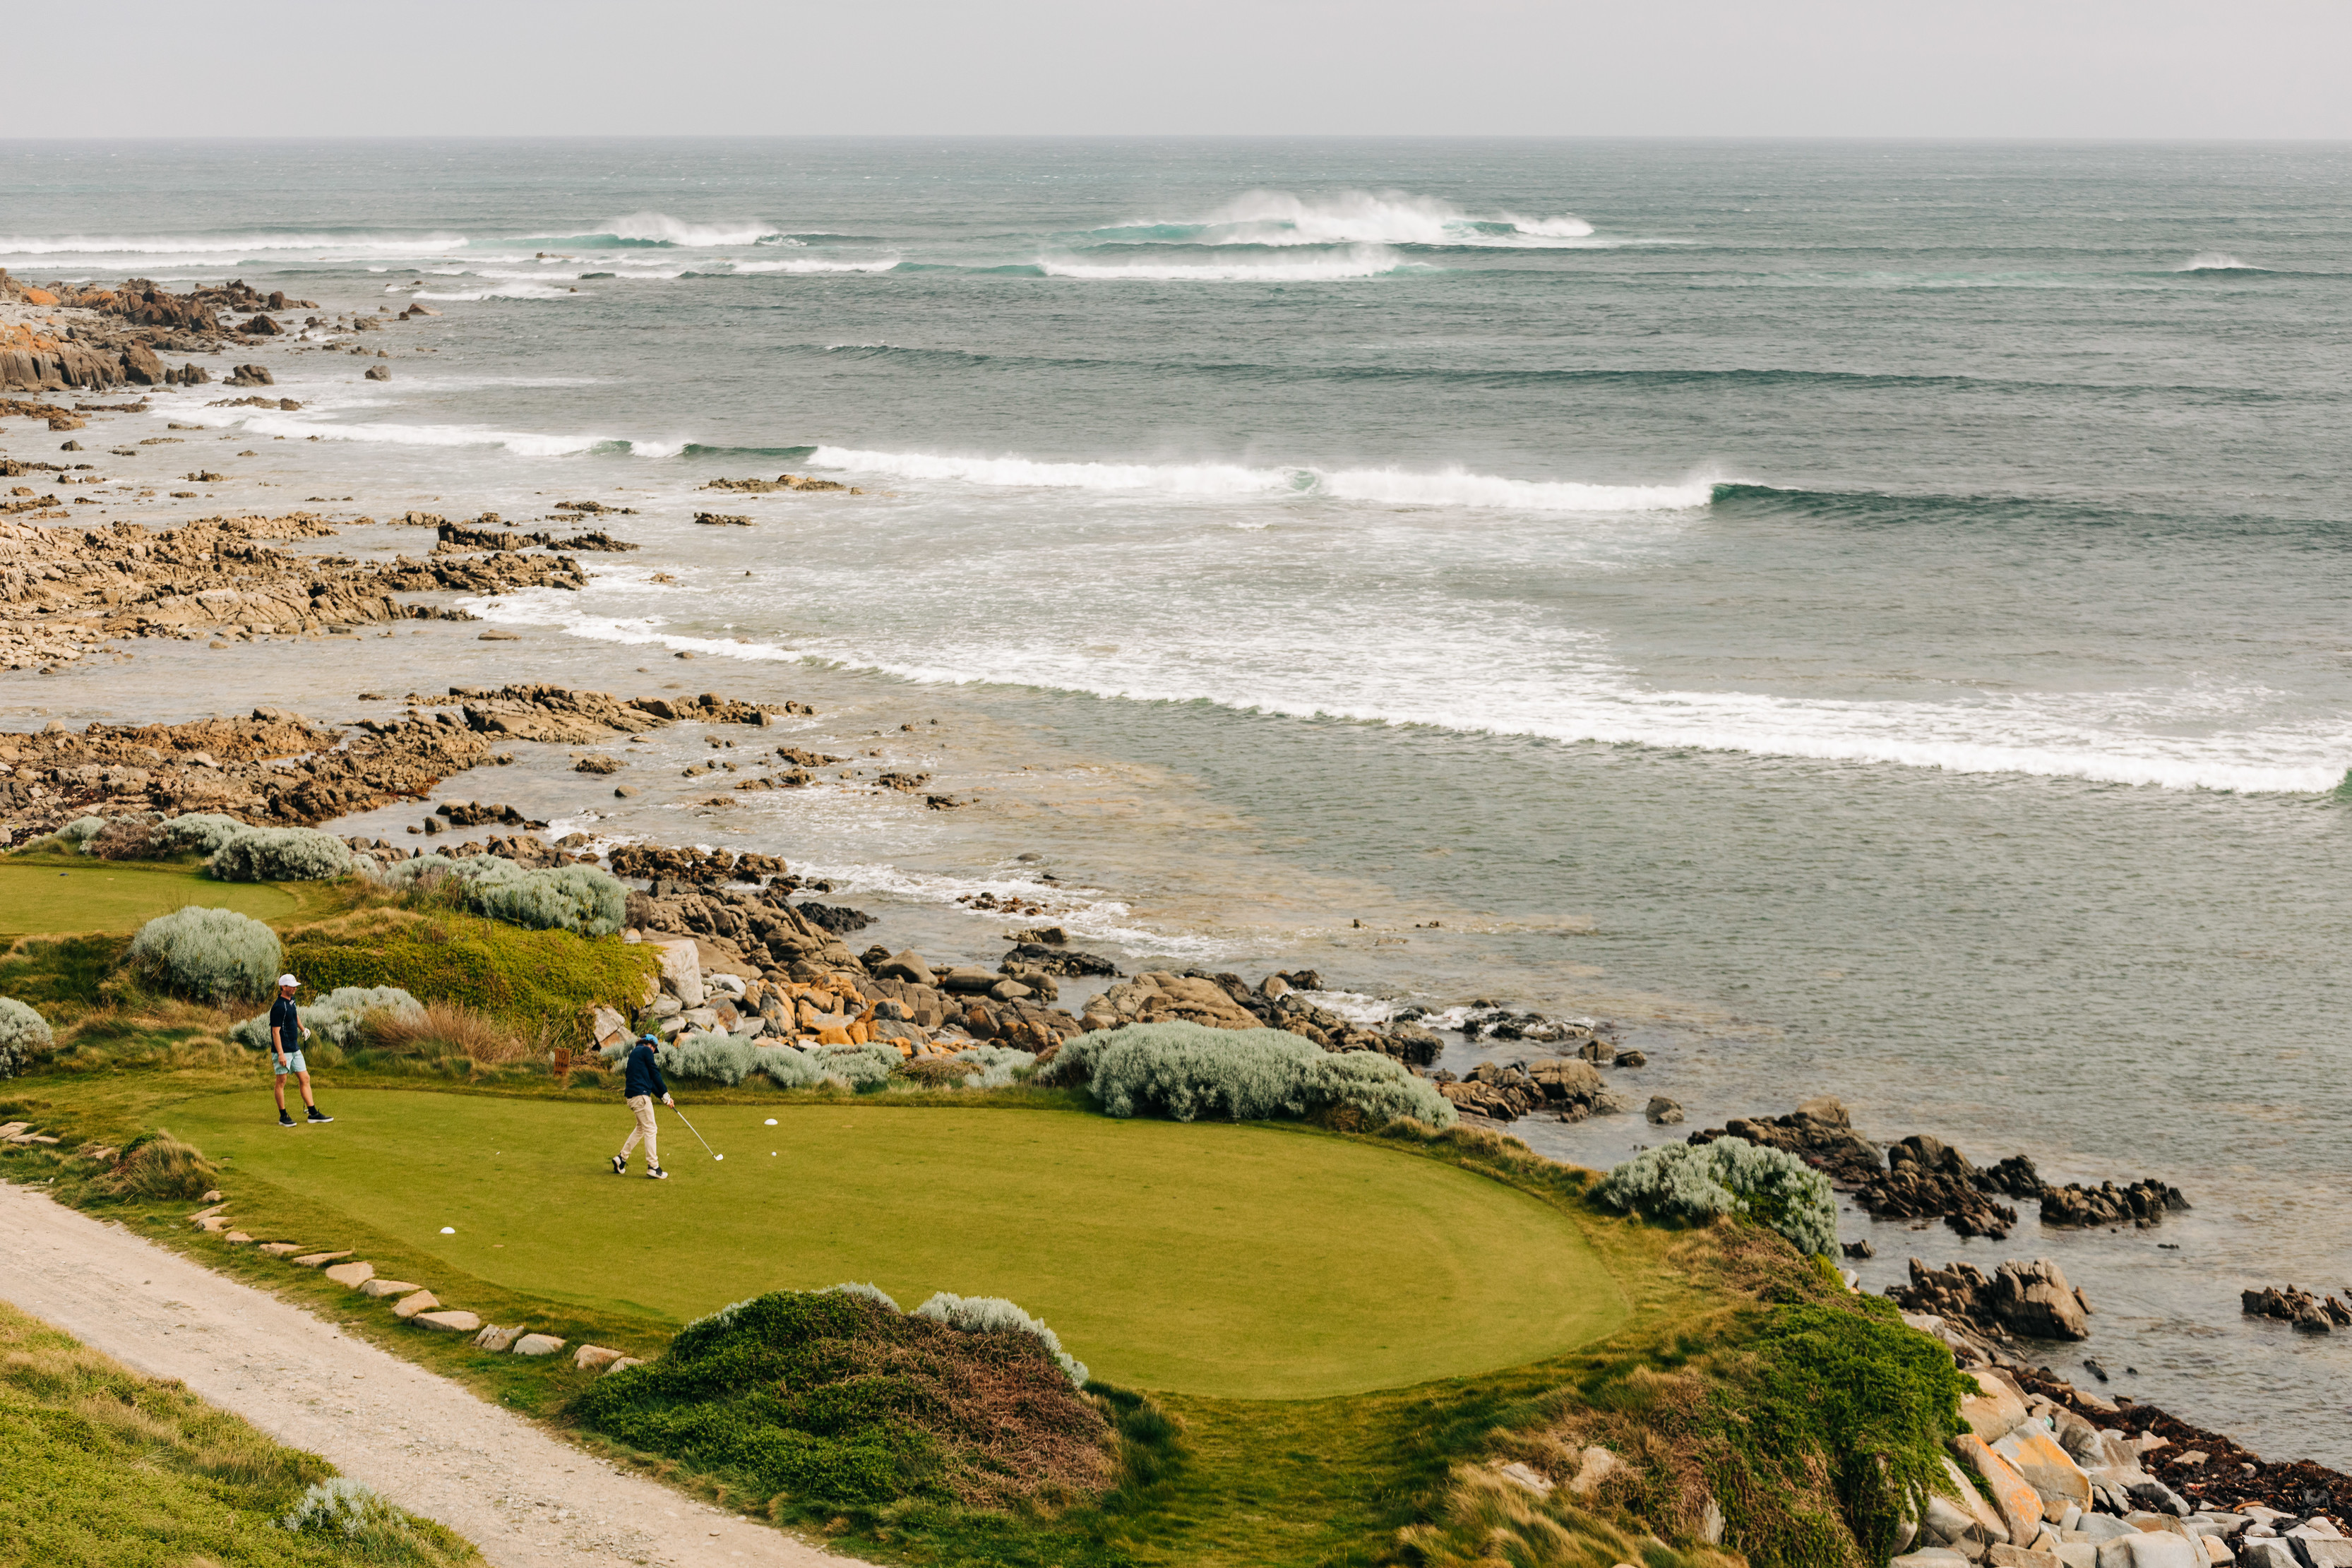 Wide of Ocean Dunes Golf Course, with the Great Southern Ocean as the backdrop. Golfers play in the foreground.